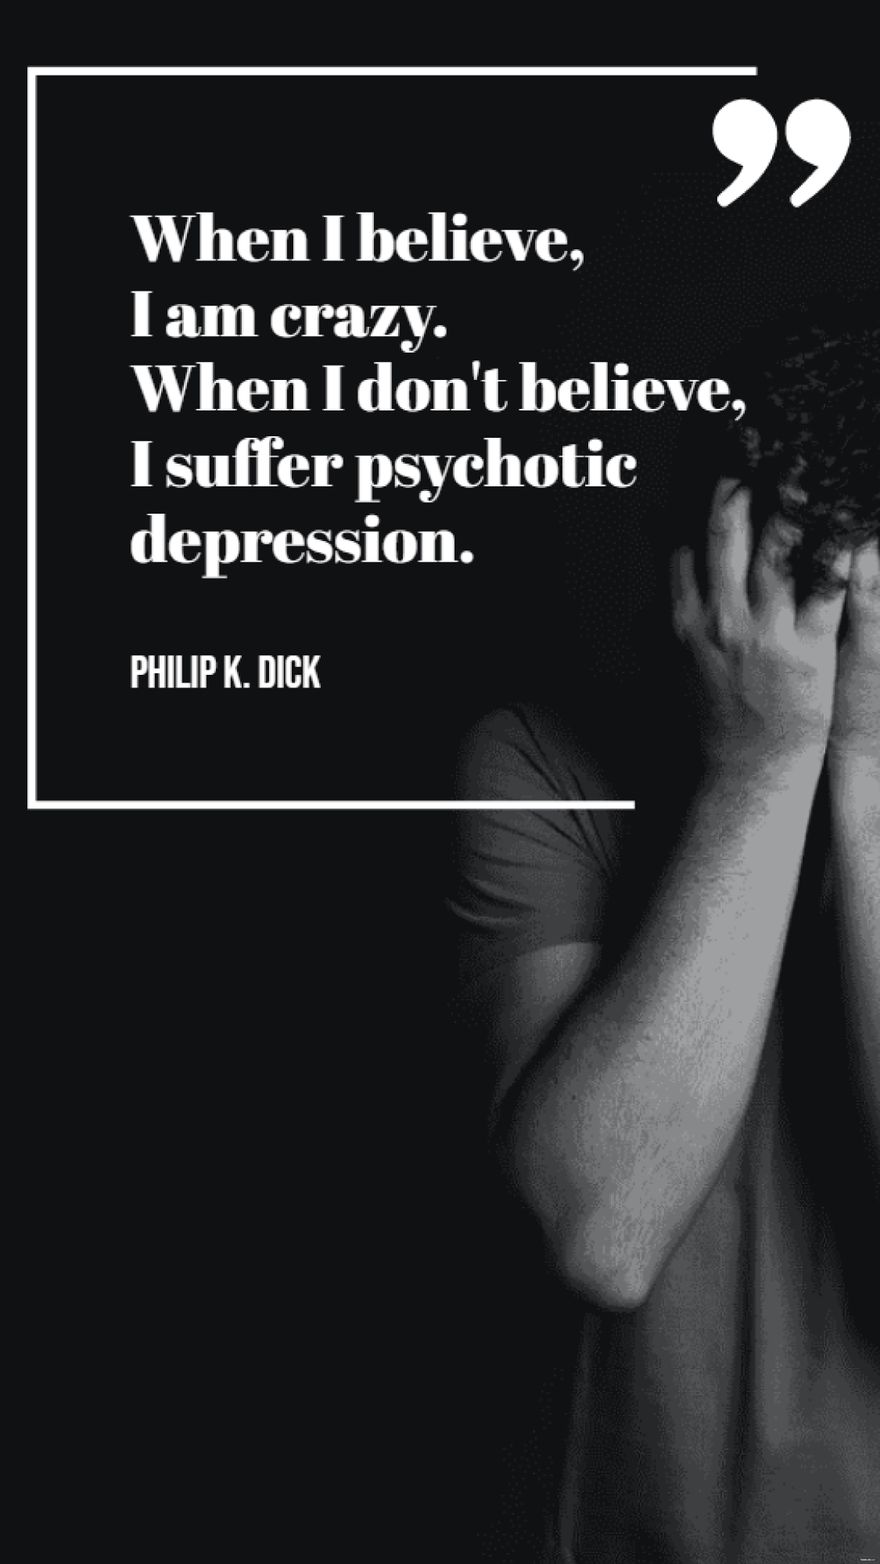 Philip K. Dick - When I believe, I am crazy. When I don't believe, I suffer psychotic depression.